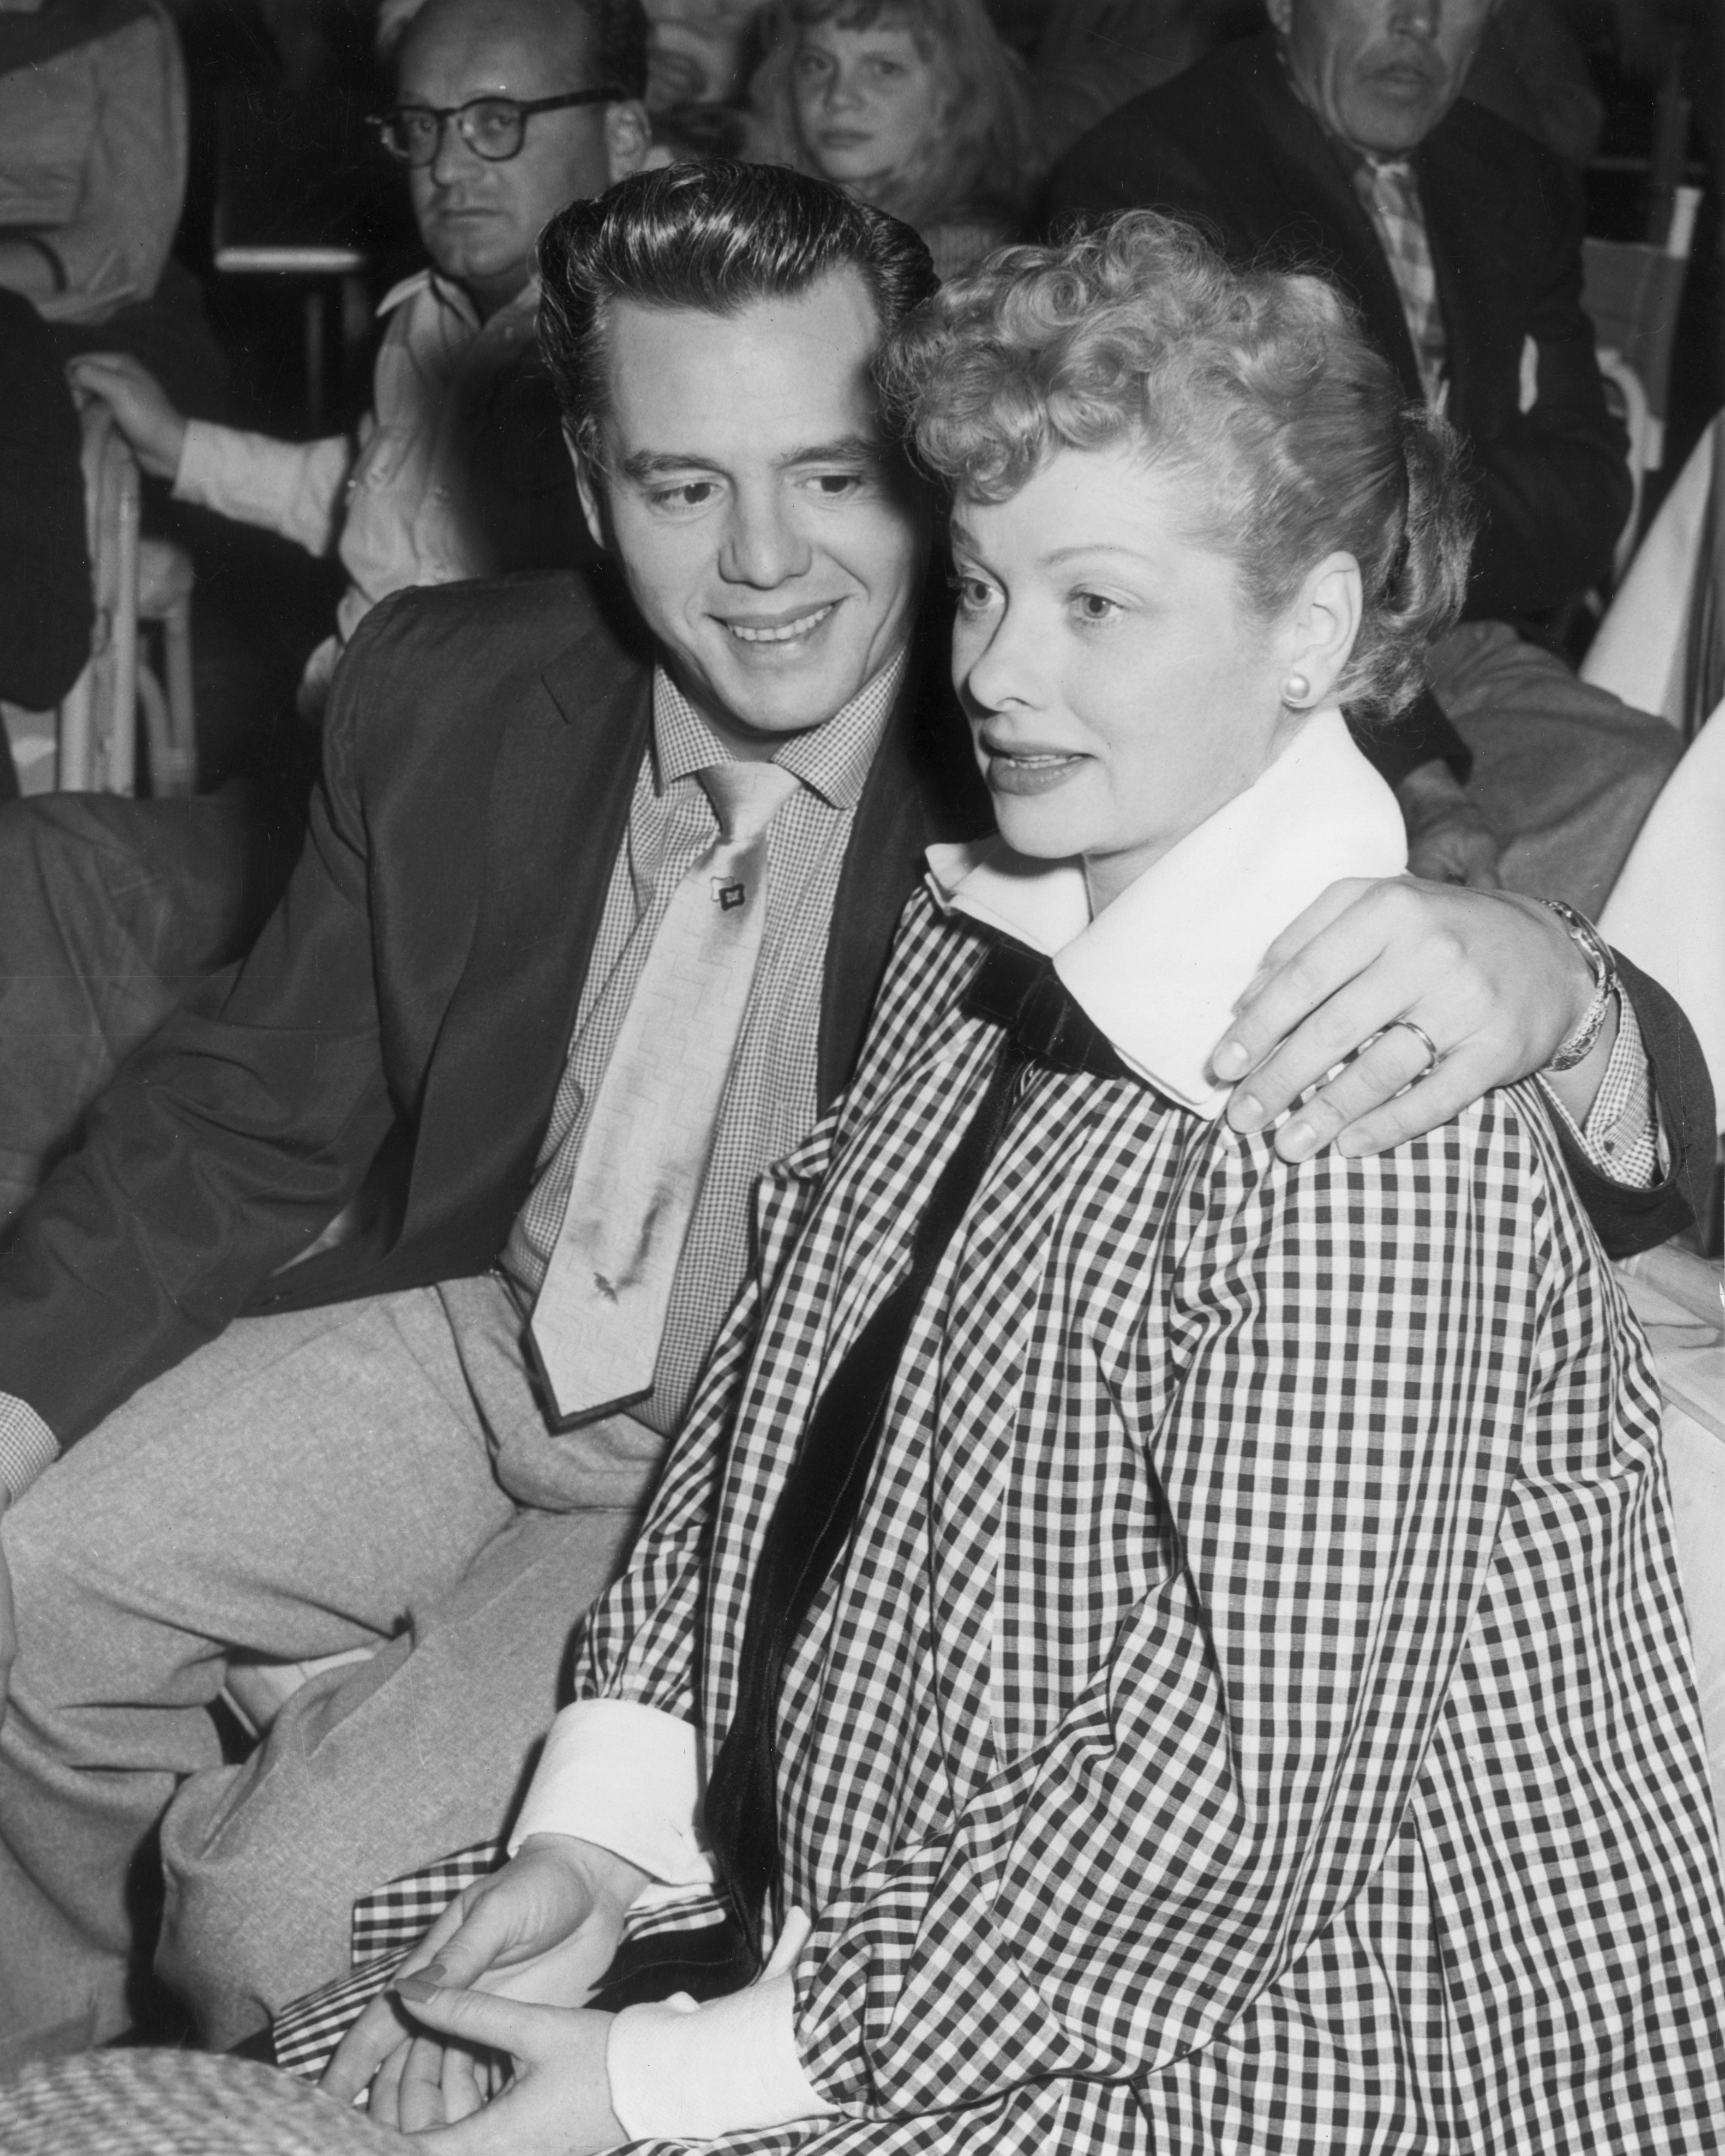 Desi Arnaz embraces his wife, Lucille Ball while watching a televised football game at the Racquet Club in Palm Springs, California, circa 1953 | Photo: Getty Images